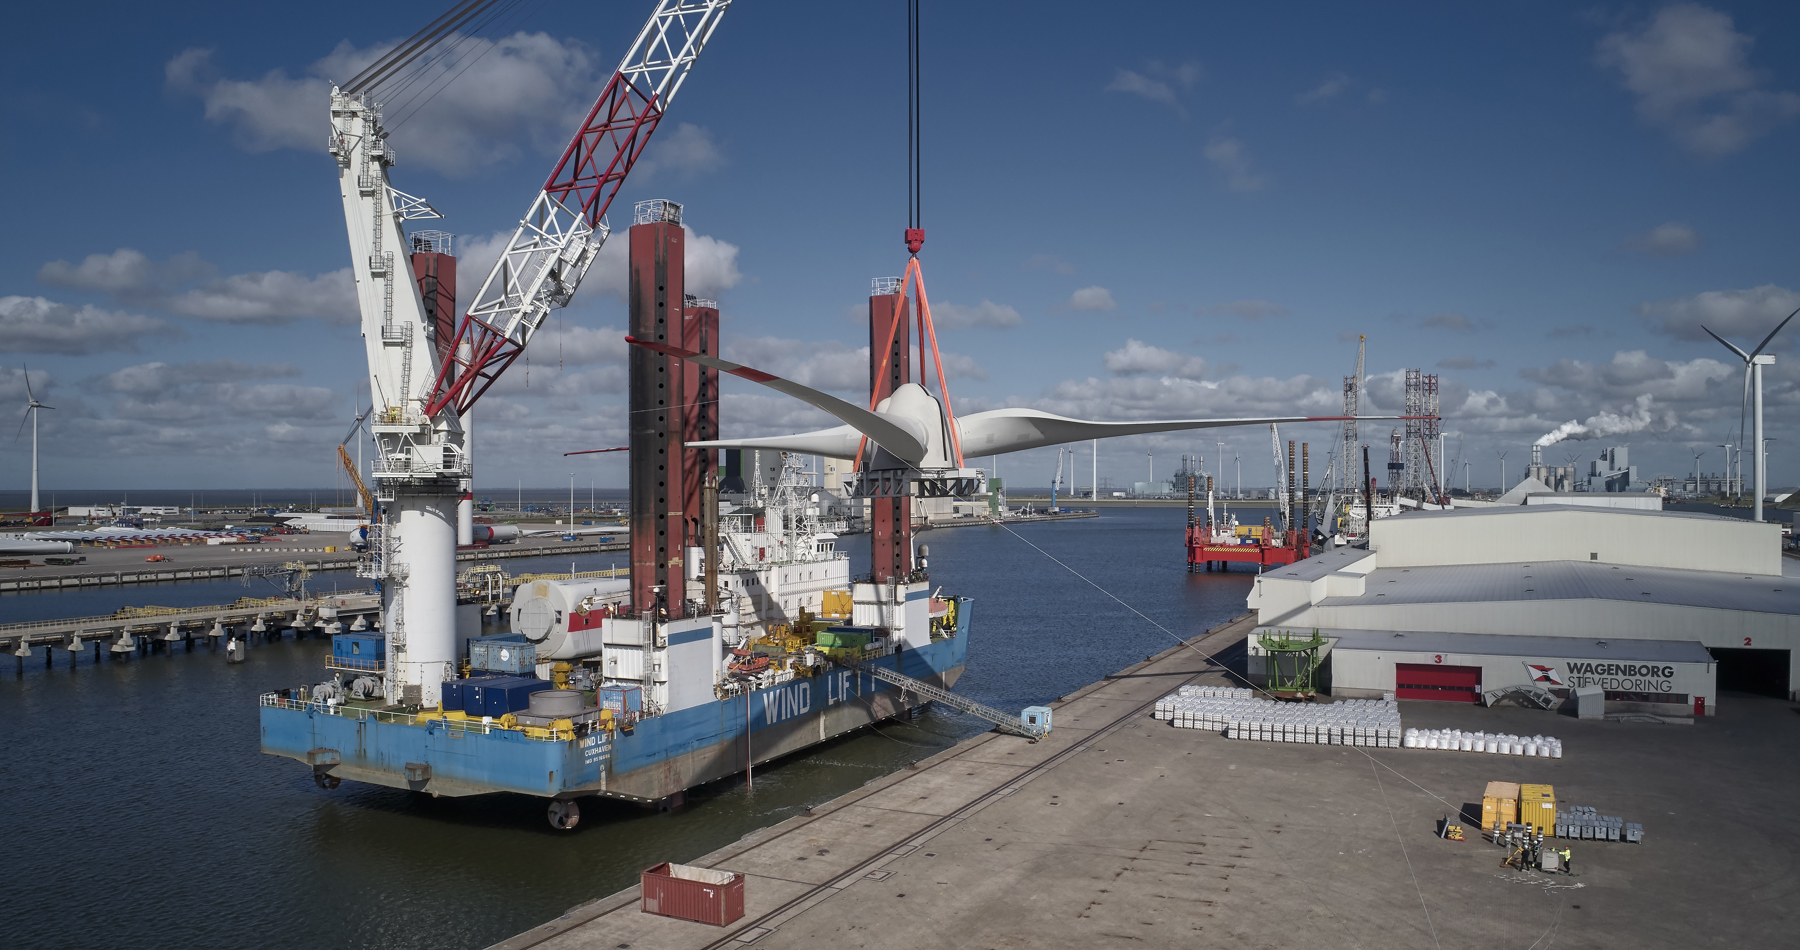 Shore power connection at Wagenborg terminal Eemshaven